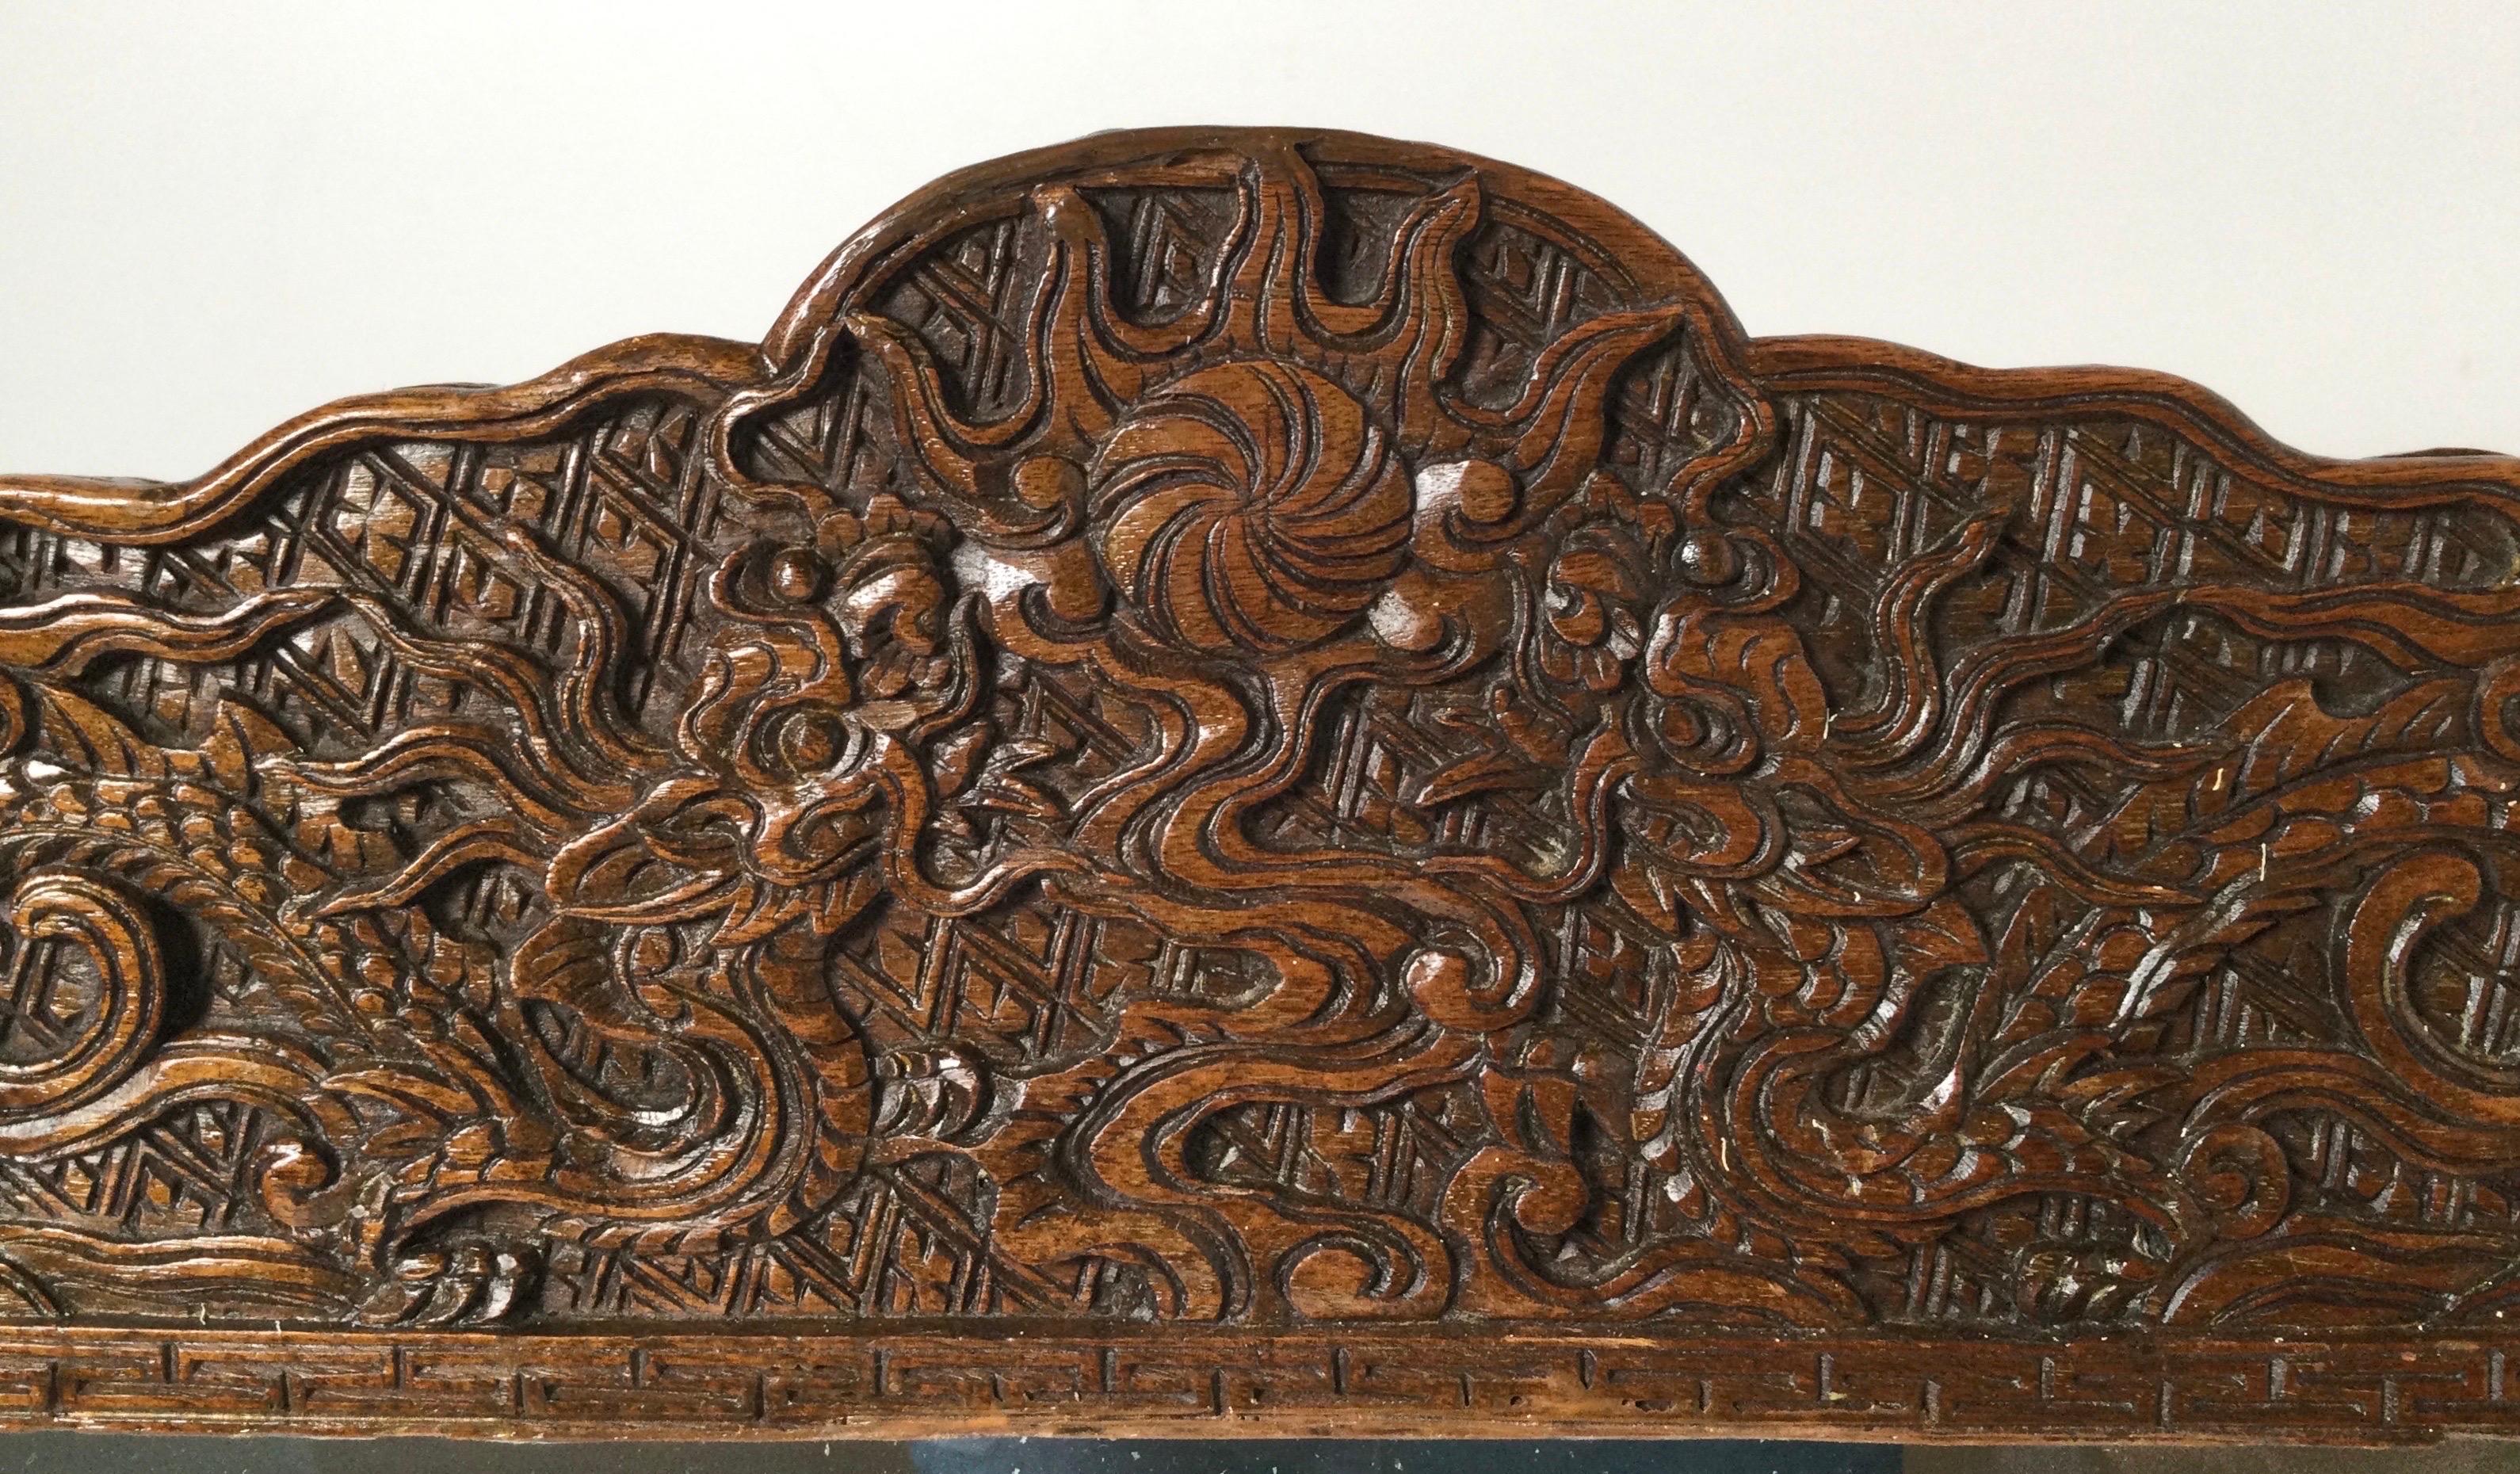 A pair of Asian hand carved framed mirrors with beveled glass. The delicately carved frames with dragons, scrolling and symbols, with carving along the outside edge. Measures: 22 wide, 21 high.